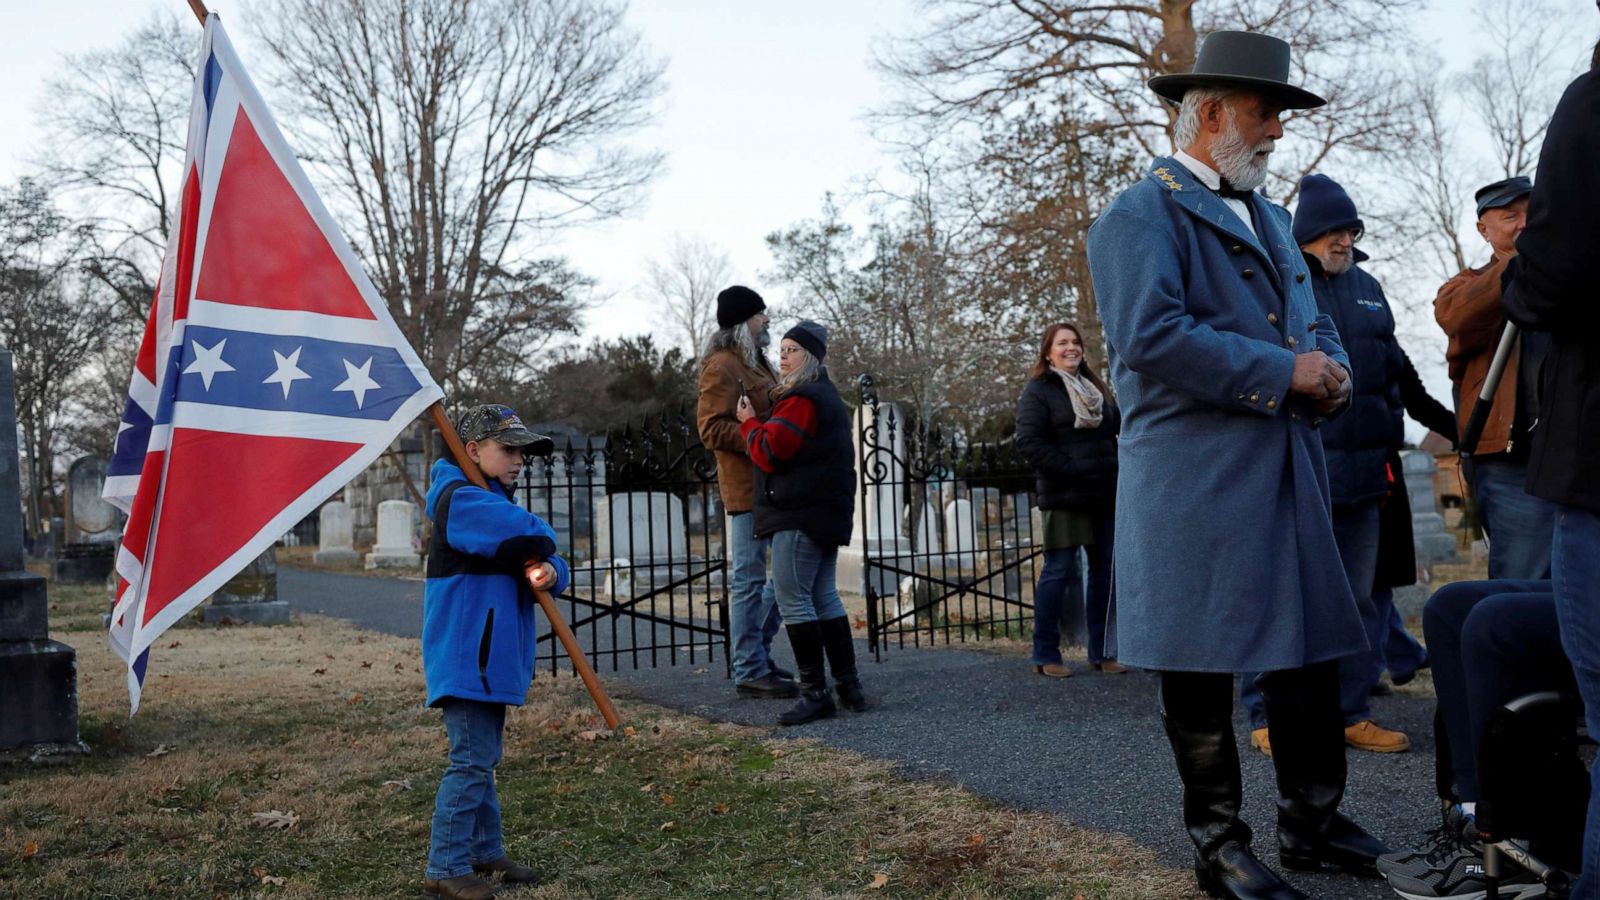 Holiday honoring Confederate generals swapped for Election Day in Virginia  - ABC News